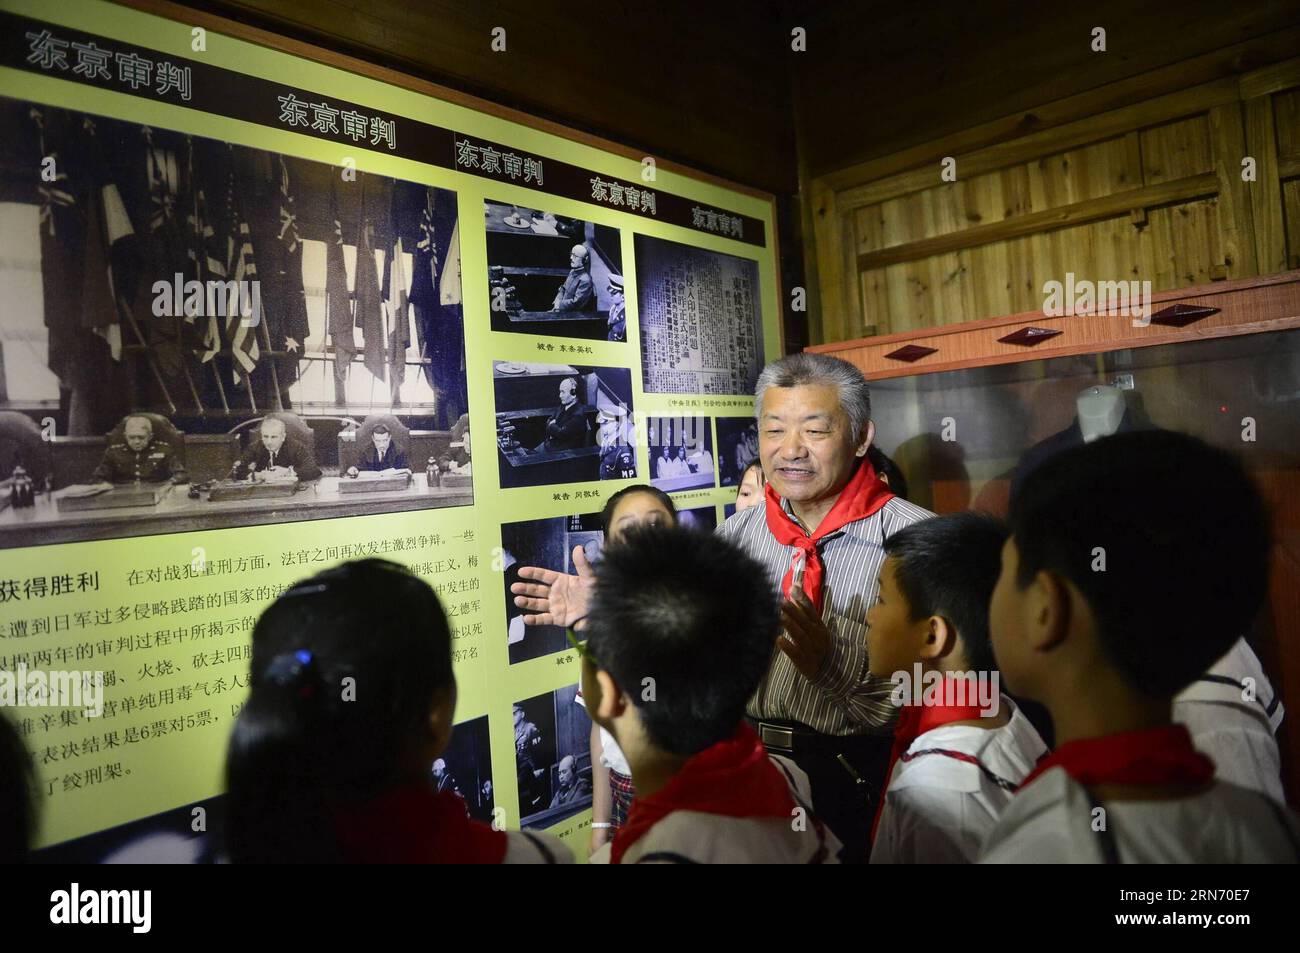 (150812) -- NANCHANG, Aug. 12, 2015 -- Mei Xiao ao, son of Mei Ru ao, the Chinese judge at the International Military Tribunal for the Far East, presents the history about Tokyo trials to students at his father s former residence during an activity marking the 70th anniversary of victory in the Chinese People s War of Resistance Against Japanese Aggression in Qingyunpu District of Nanchang, east China s Jiangxi Province, Aug. 12, 2015. ) (xcf) CHINA-JIANGXI-NANCHANG-COMMEMORATION-ACTIVITY (CN) ZhouxMi PUBLICATIONxNOTxINxCHN   150812 Nanchang Aug 12 2015 Mei Xiao Ao Sun of Mei RU Ao The Chinese Stock Photo